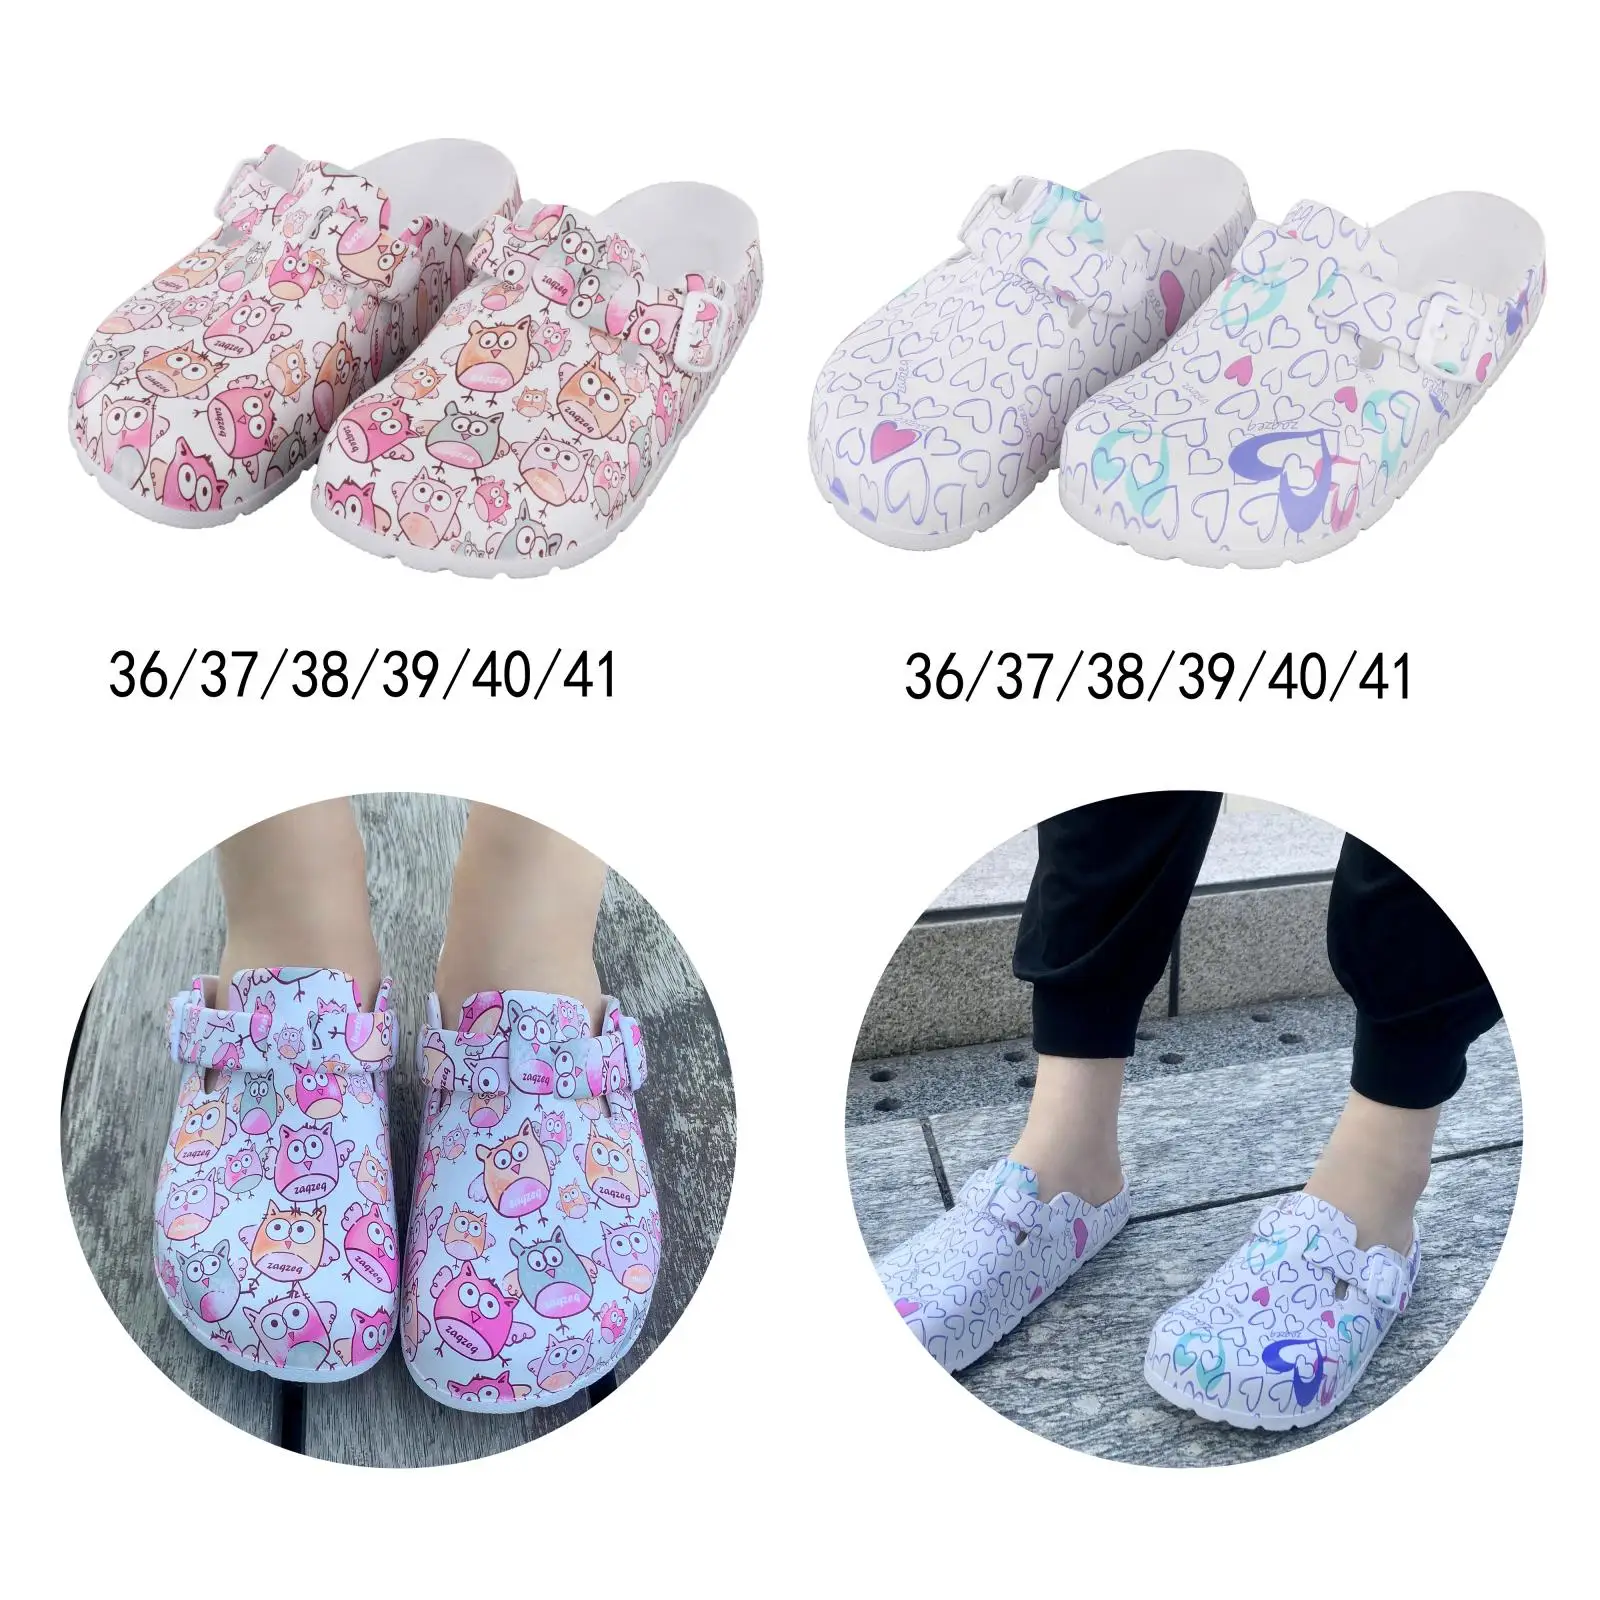 Slippers for Women Quick Drying, Doctor Clogs, Nursing Clogs, Nurse Slippers, EVA Slippers, Non Slip Soft Gym House Sandals